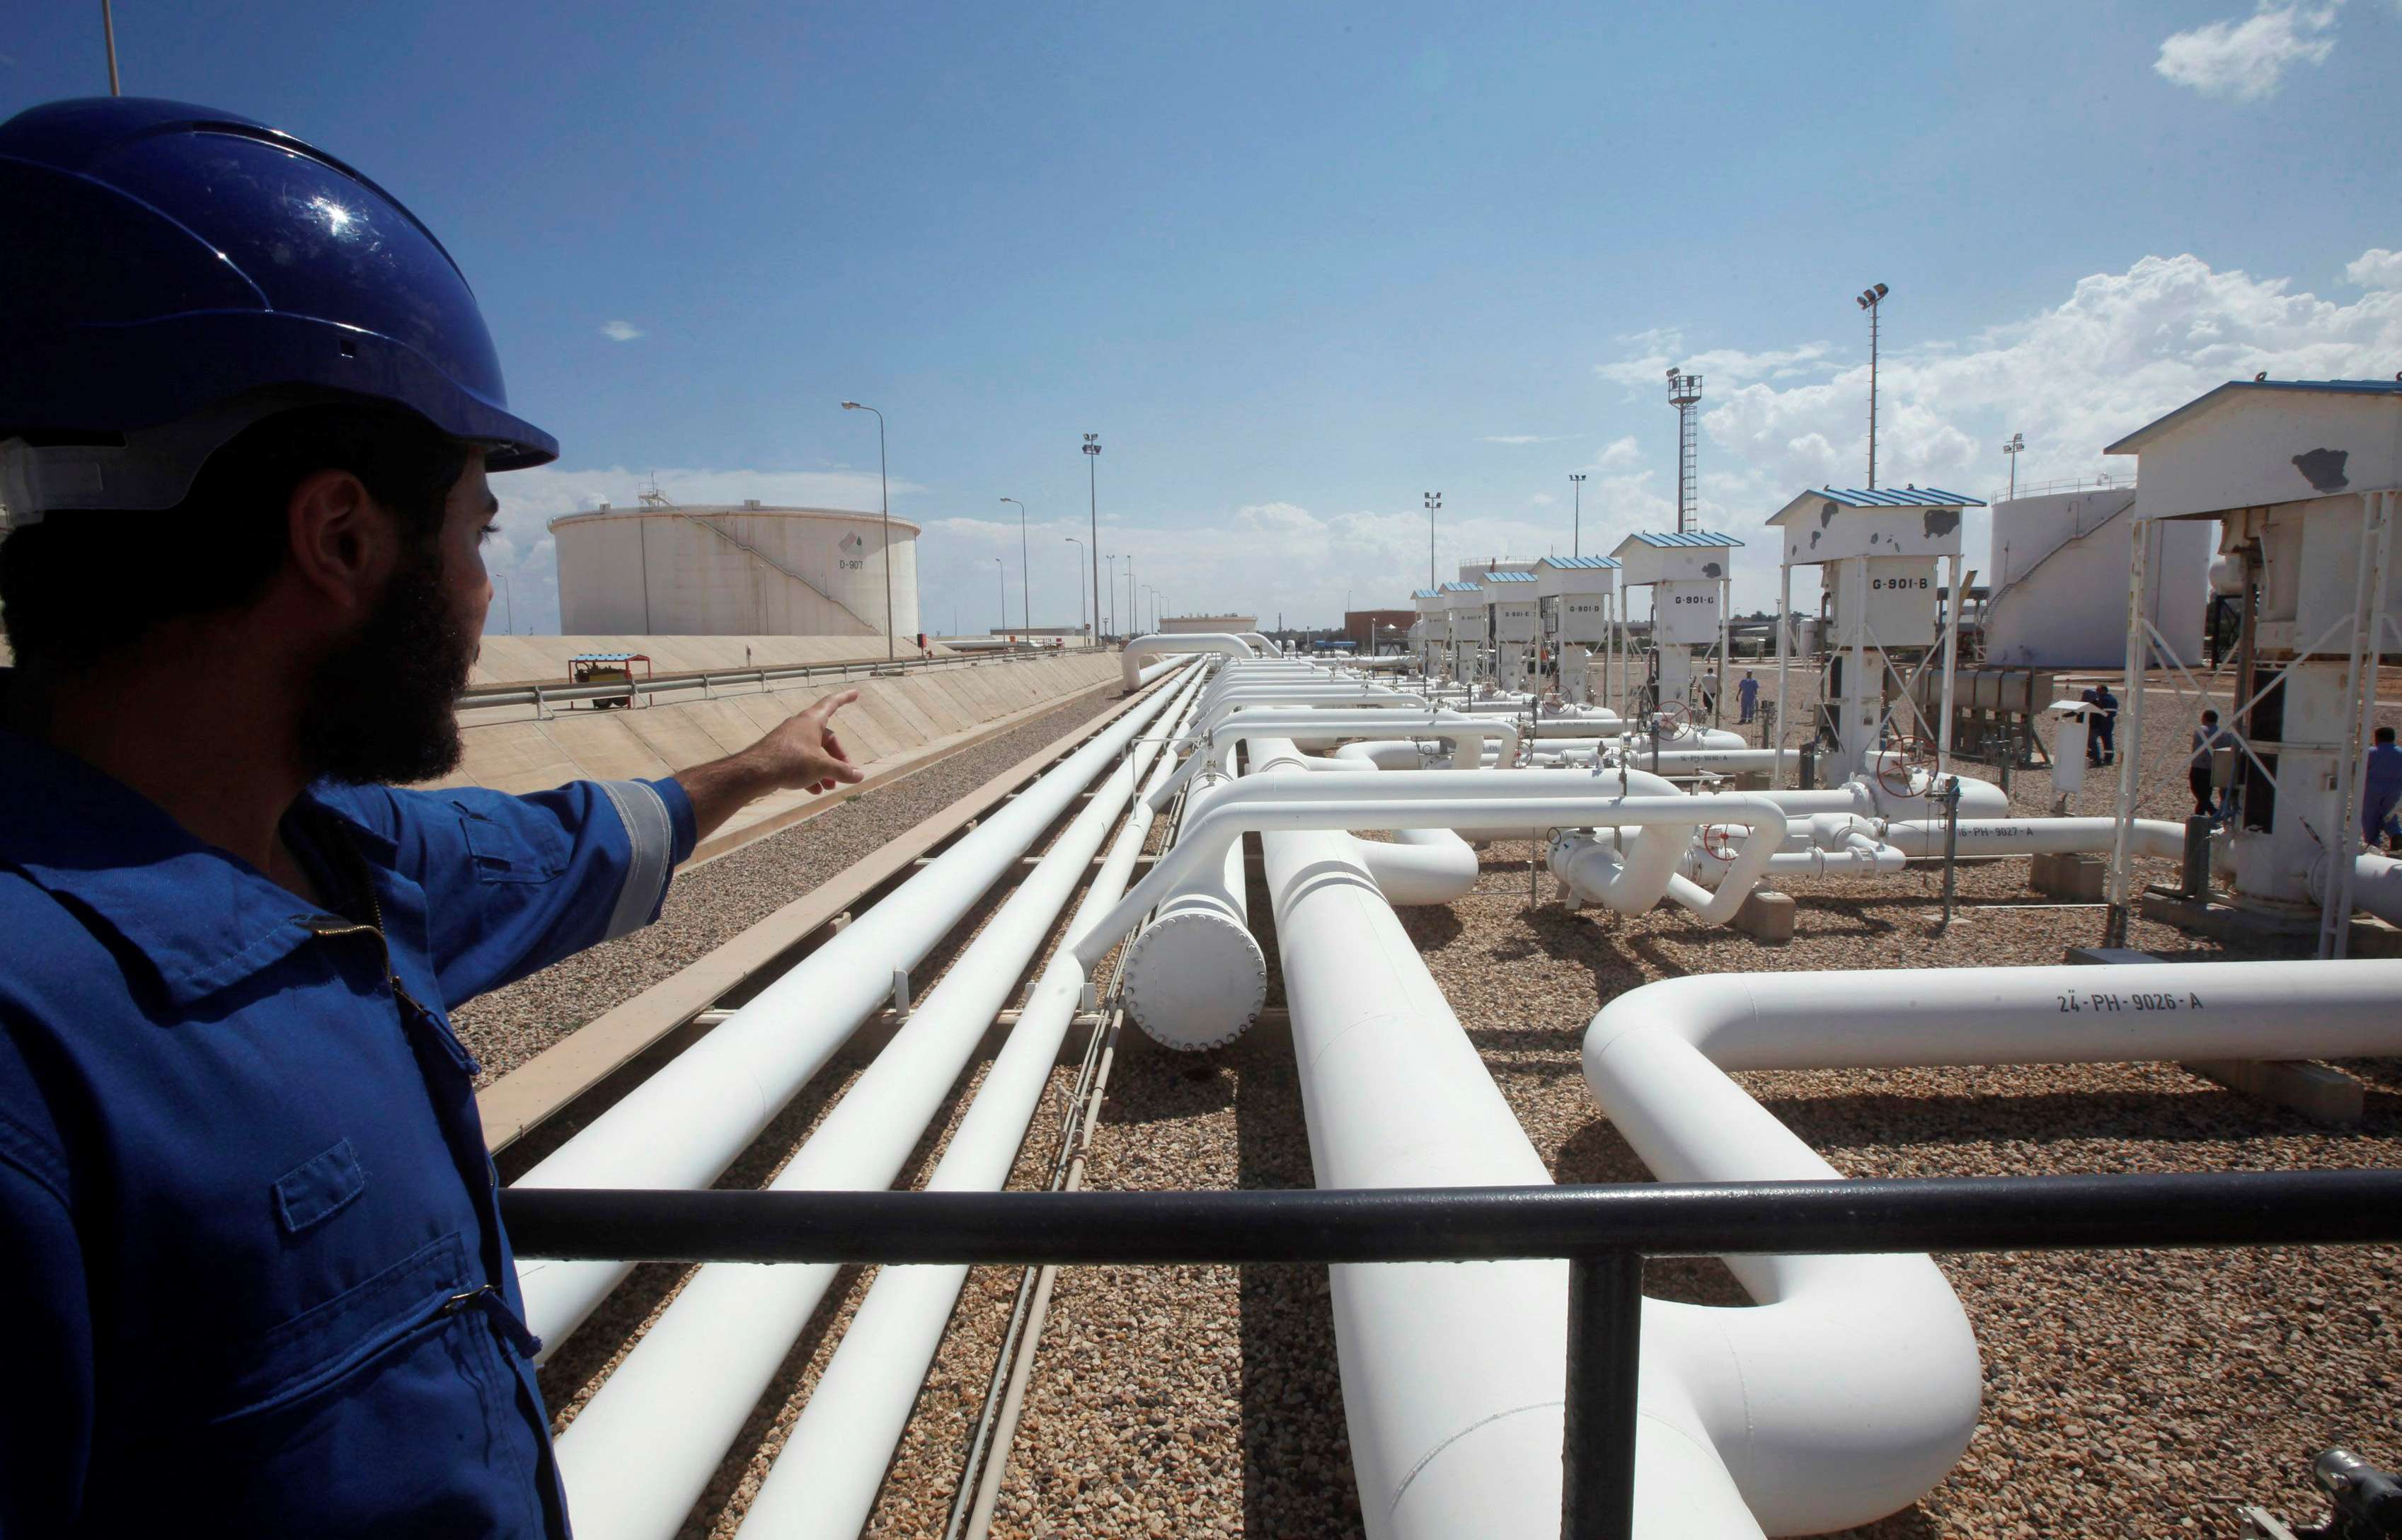 A worker gestures towards pipelines at the port and Zawiya Oil Refinery